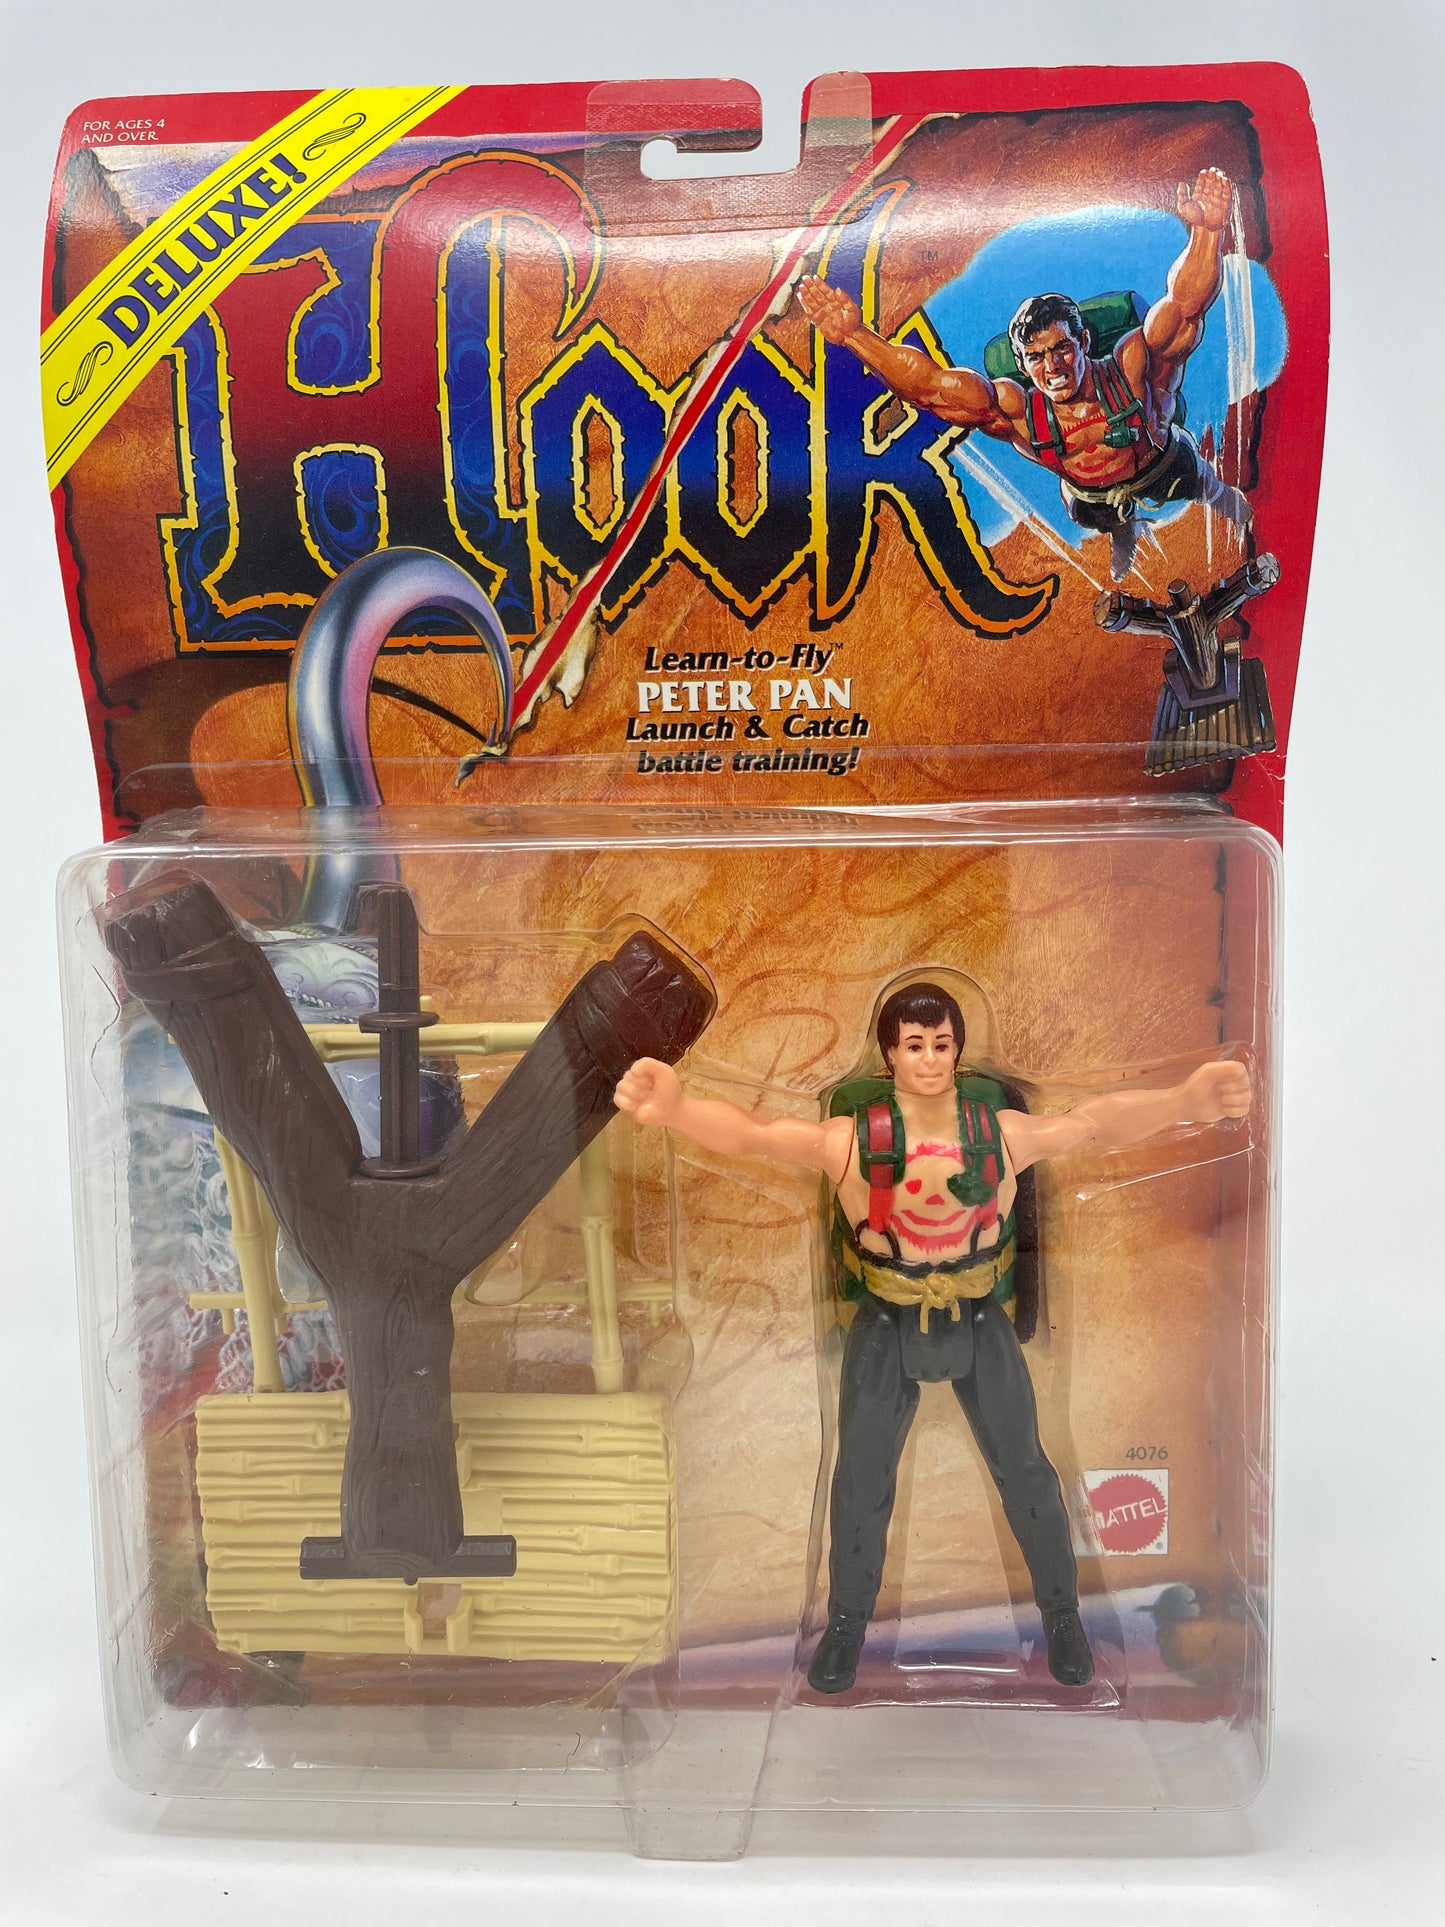 DELUXE LEARN TO FLY PETER PAN - HOOK - 1991 MATTEL